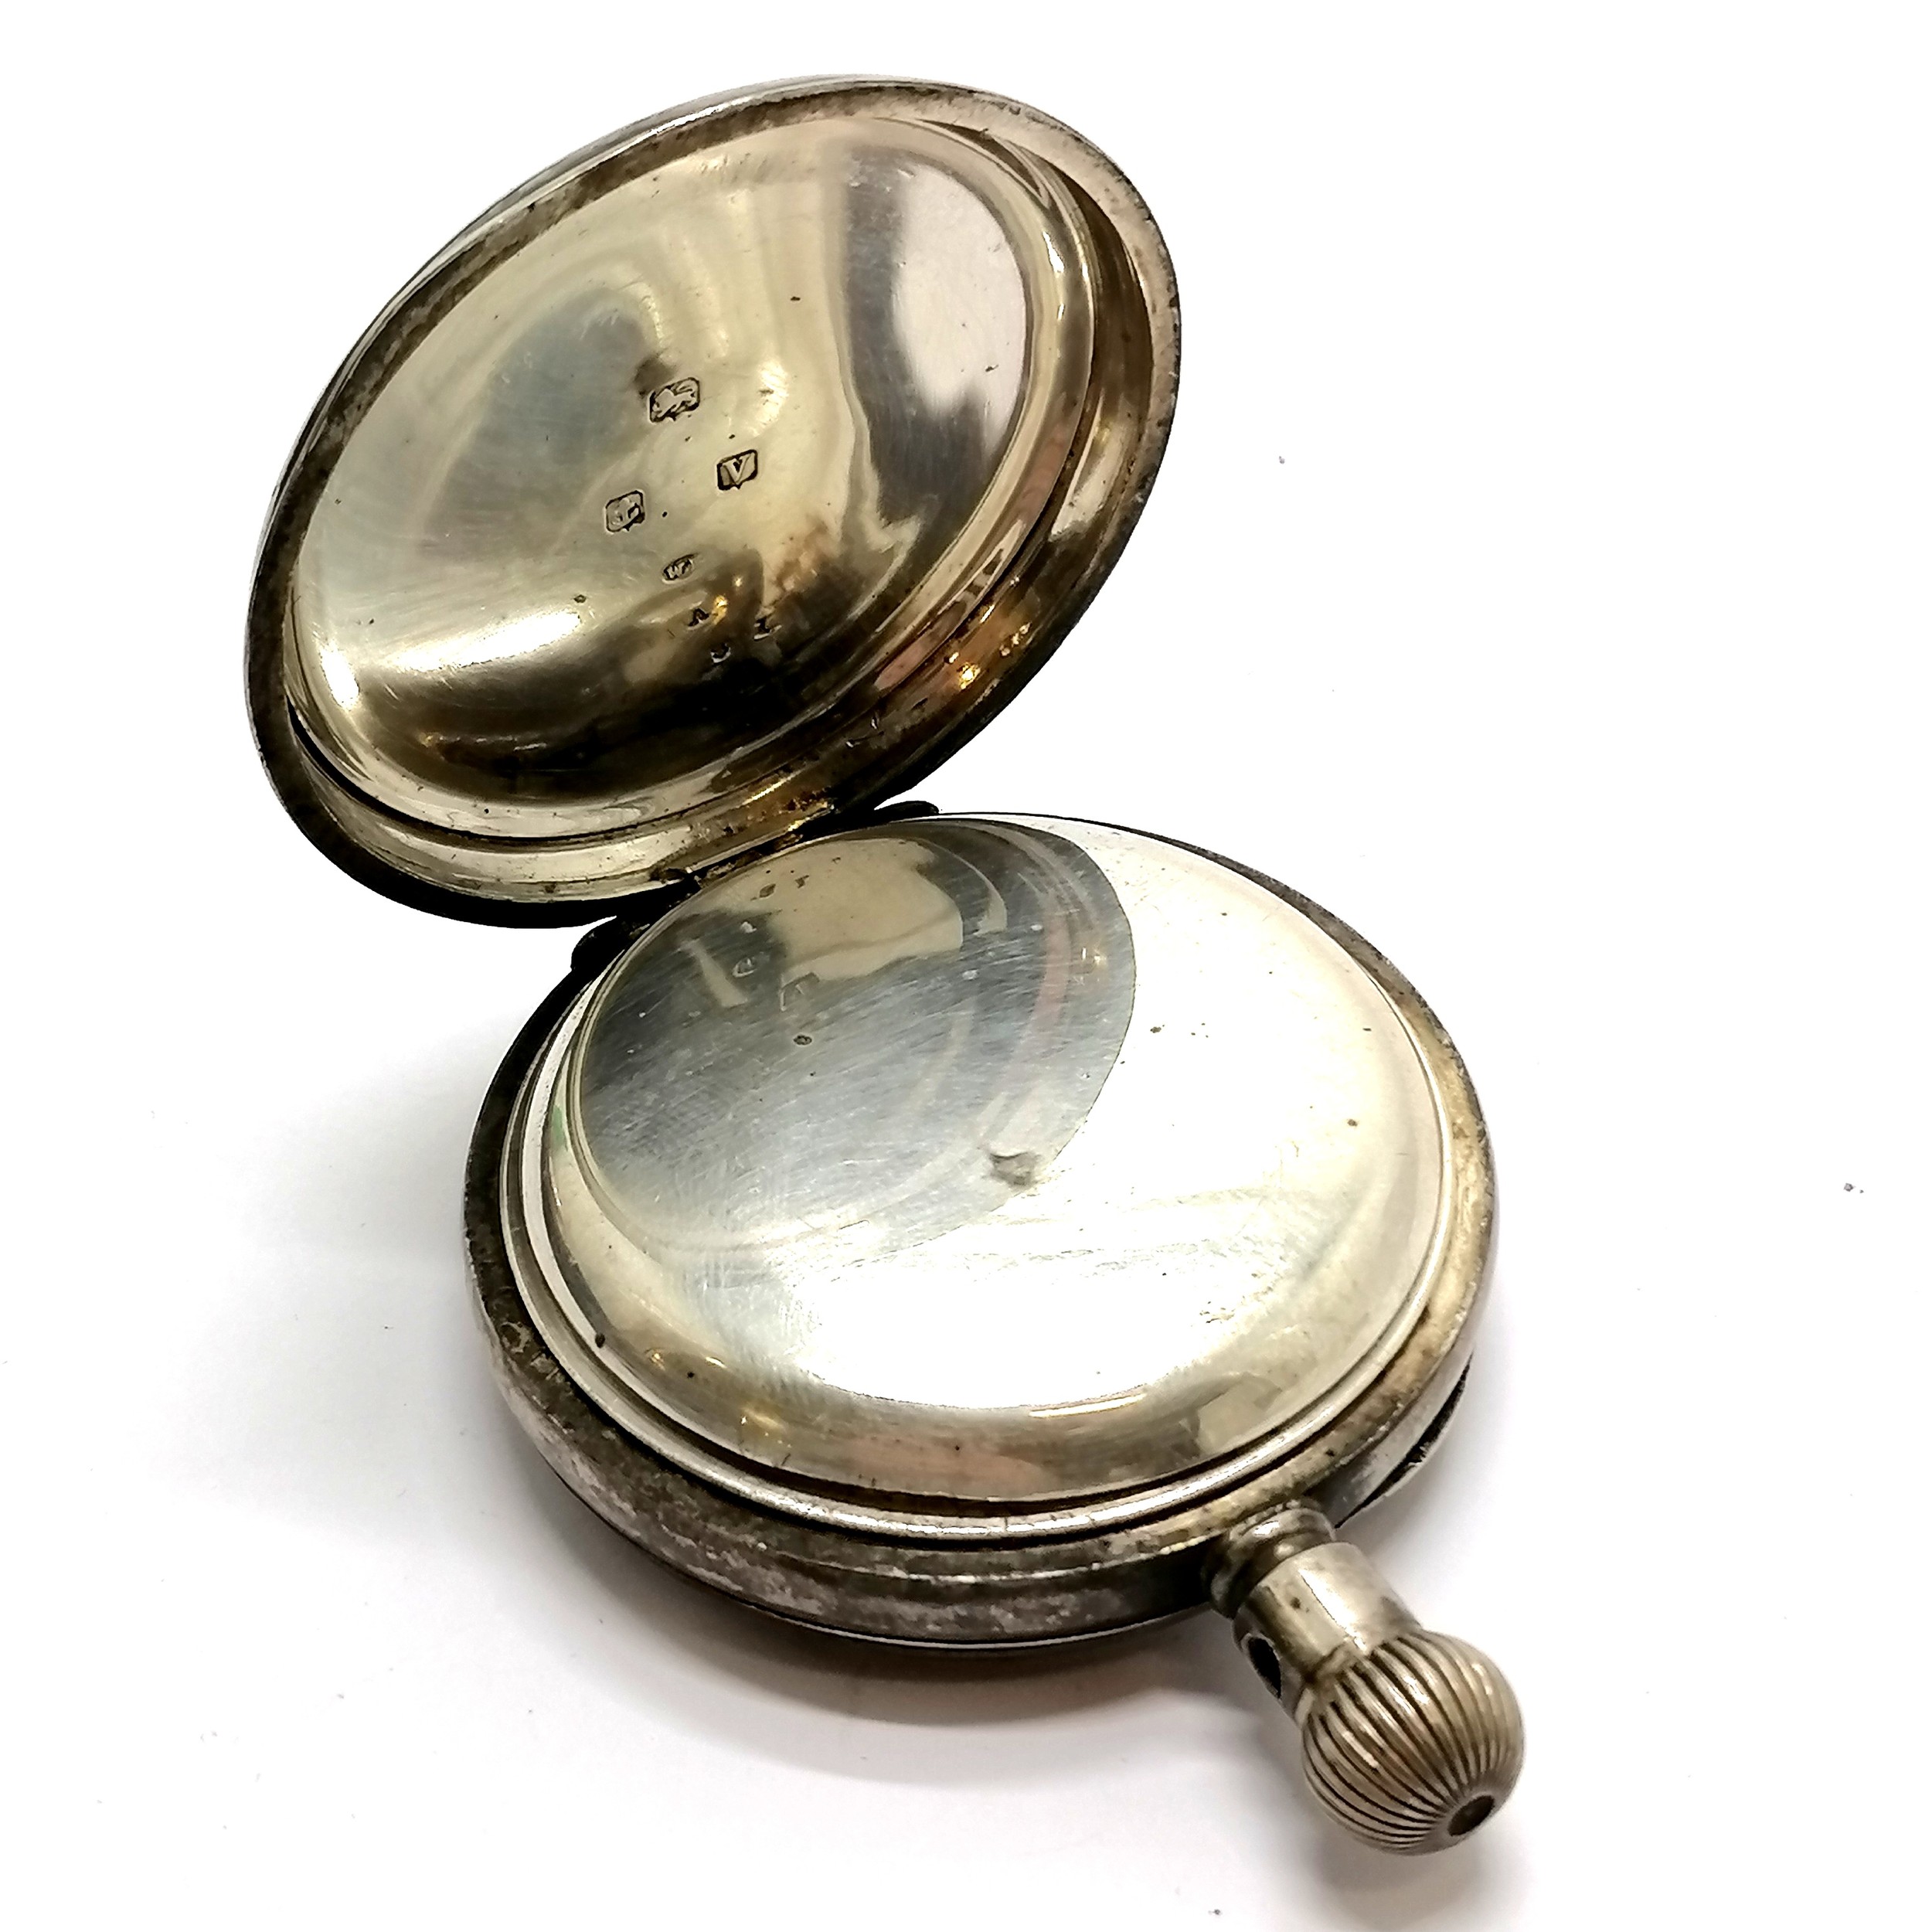 Antique Elgin silver cased large pocket watch - 5.4cm diameter & 154g total weight ~ lacks glass, - Image 2 of 3